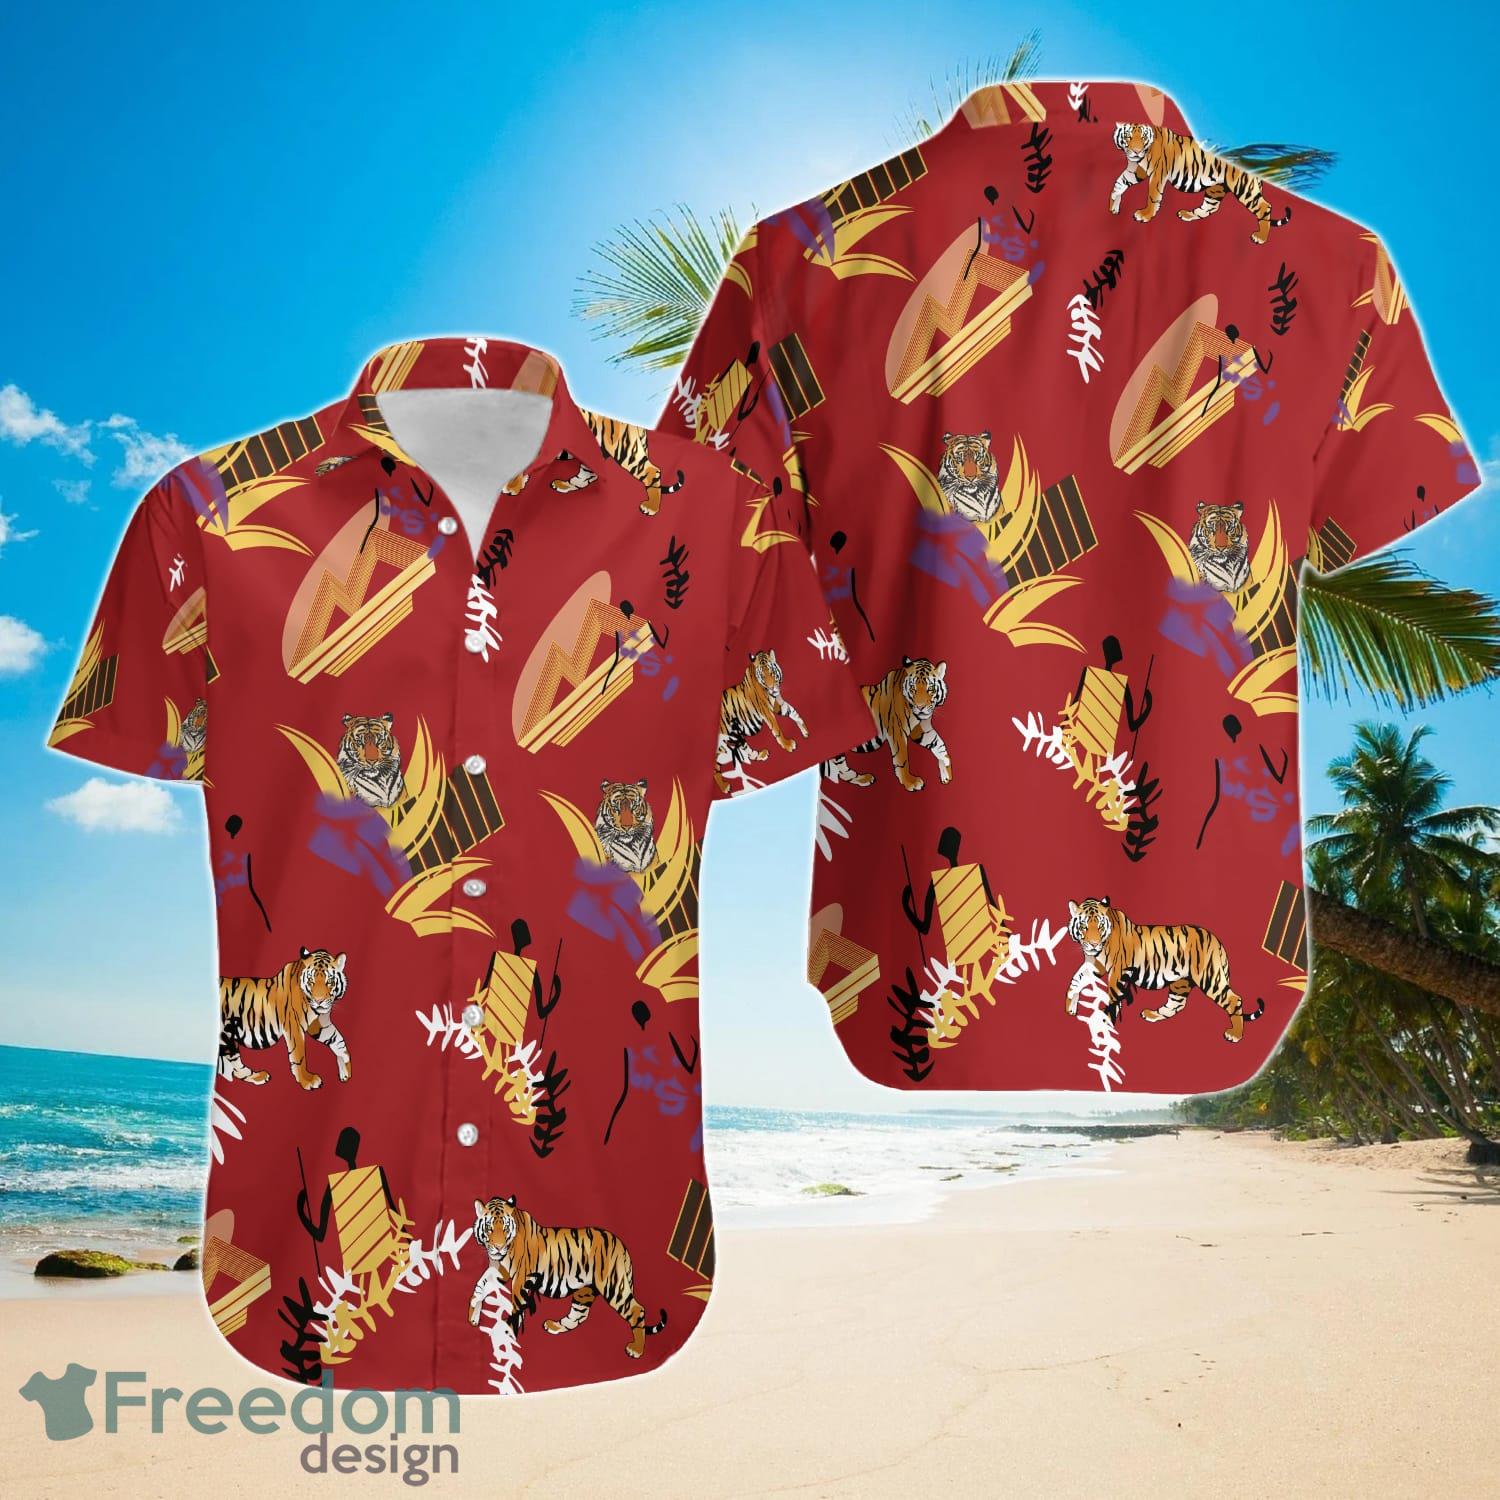 Scarface Red Tiger Hawaiian Shirt For Men And Women - Freedomdesign